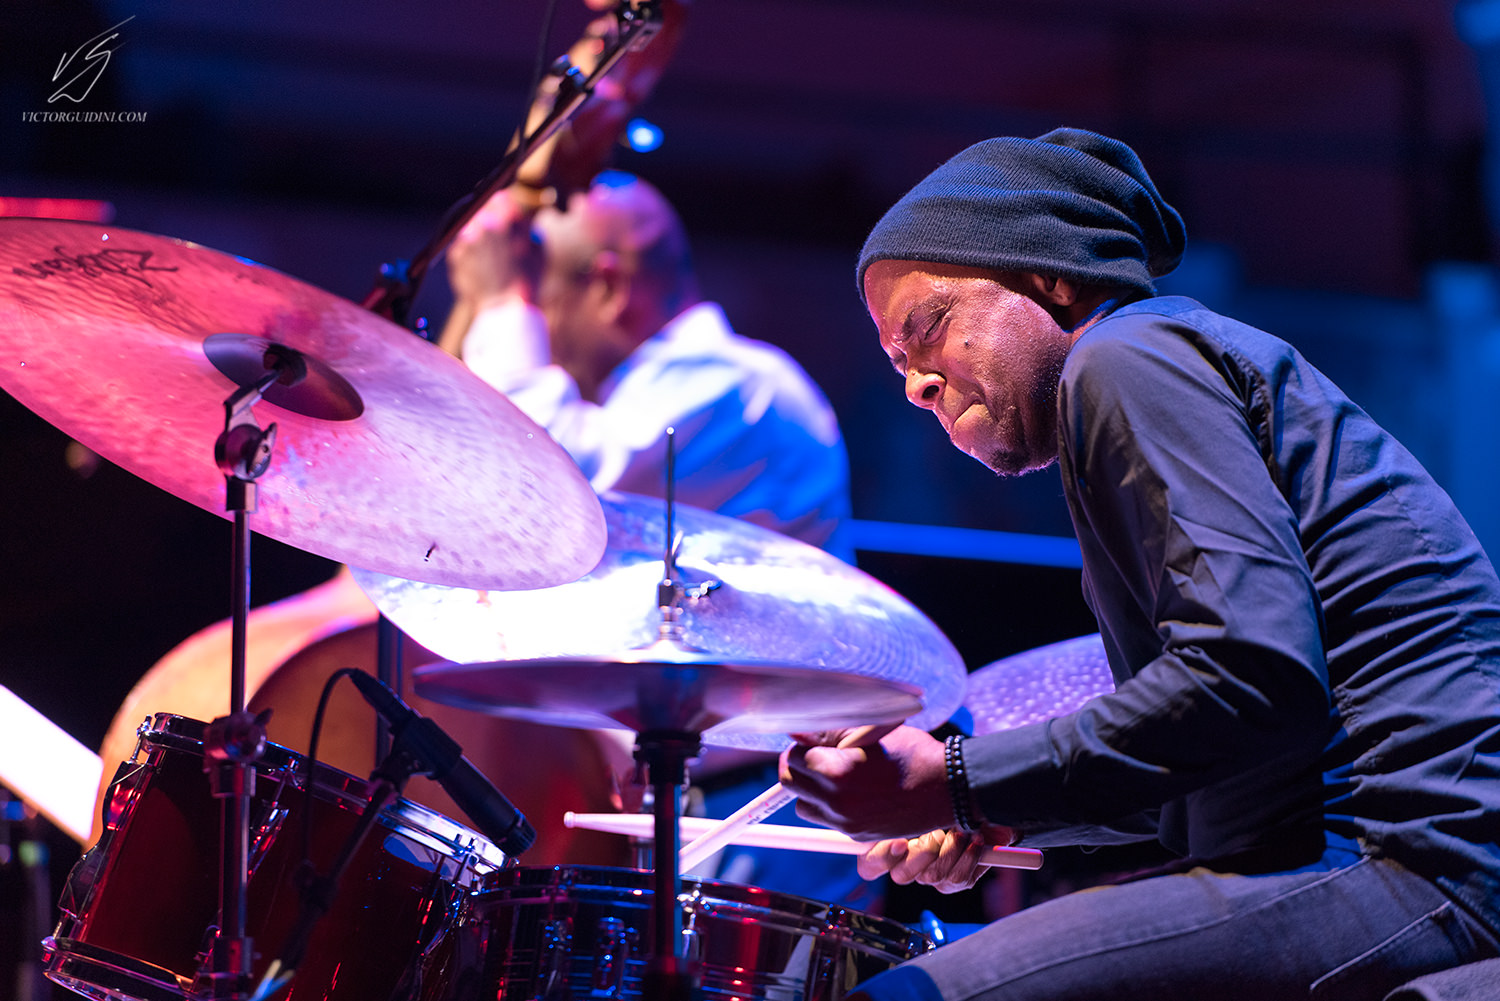 Chico Freeman + The Cookers at Cadogan Hall London Jazz Festival